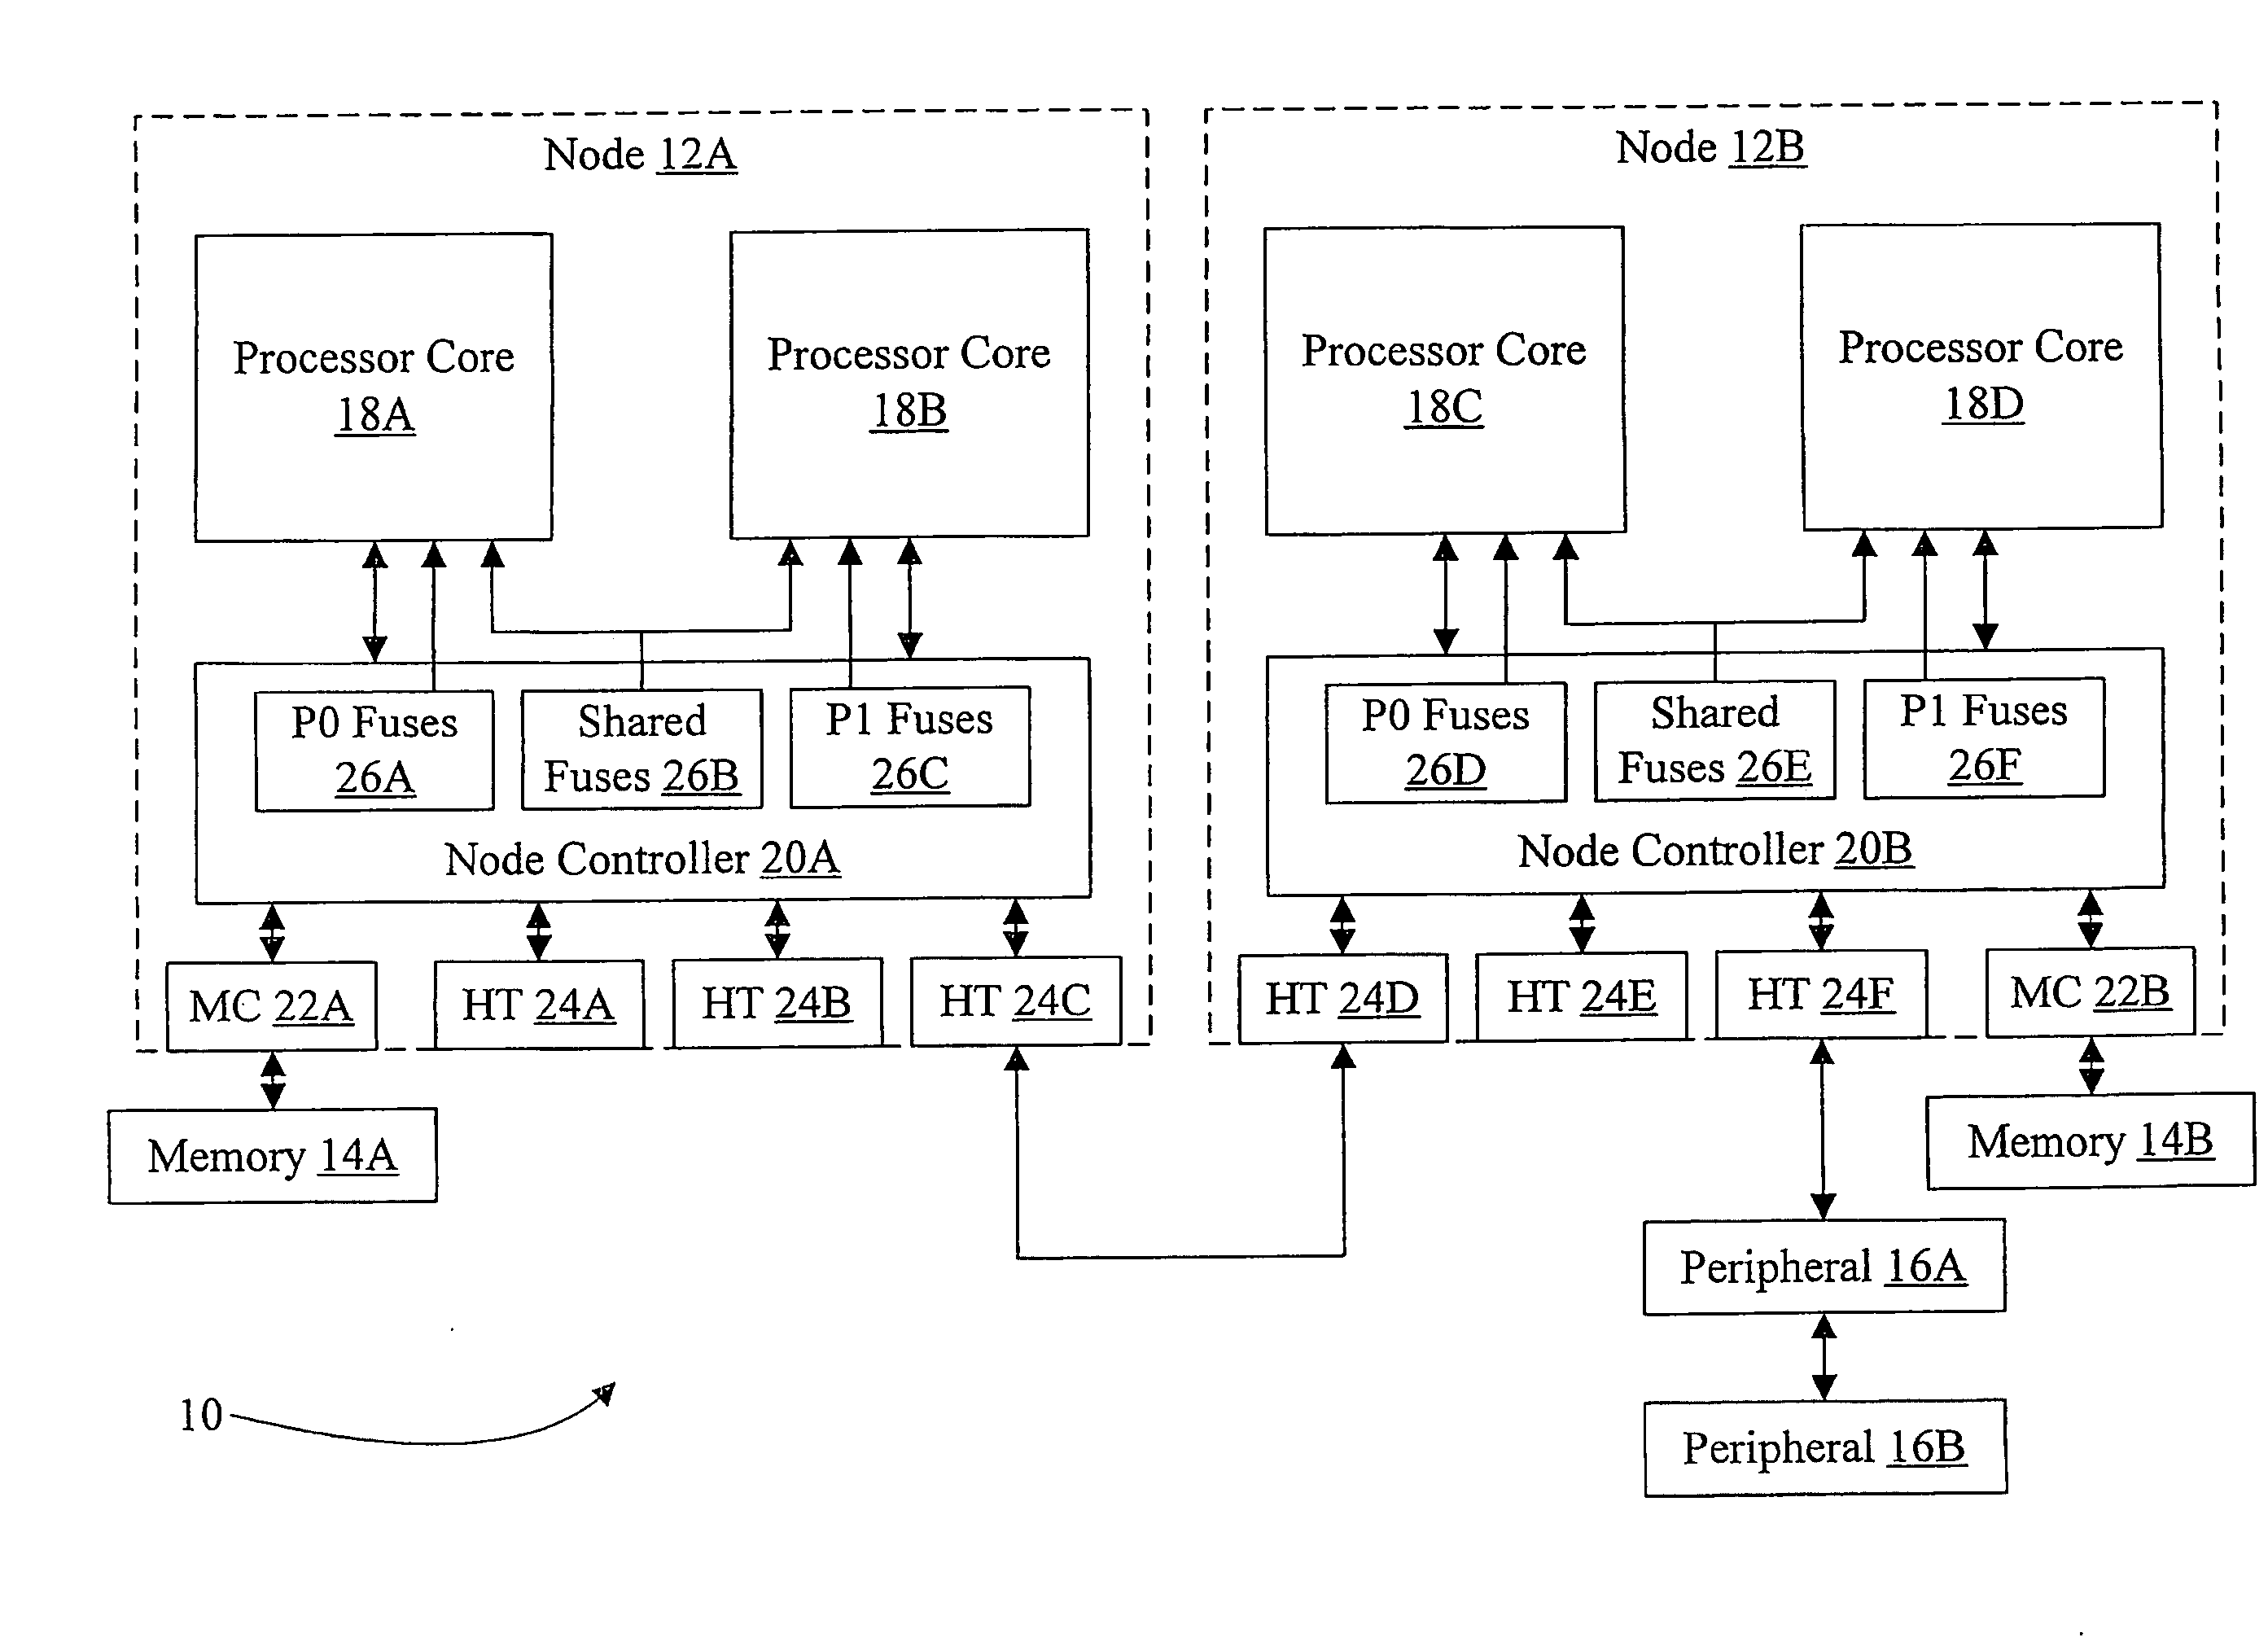 Shared Resources in a Chip Multiprocessor